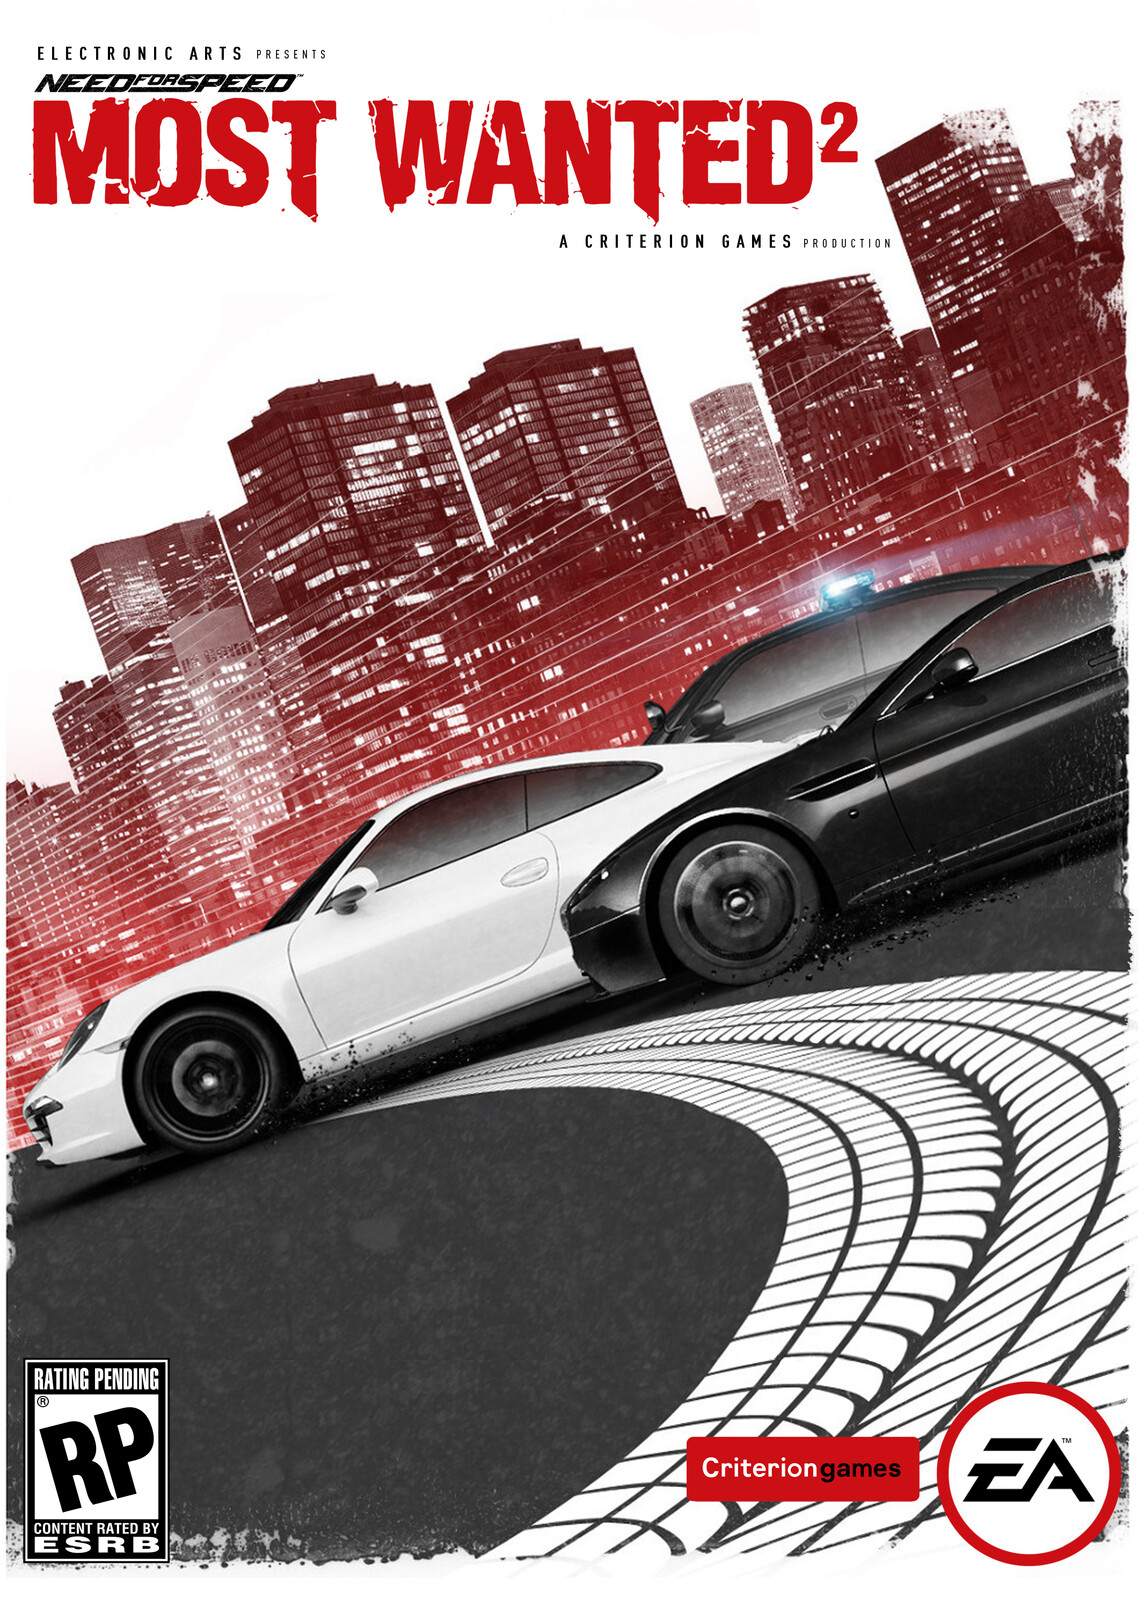 Need for Speed: Most Wanted 2 (Based on the original in-development logo)